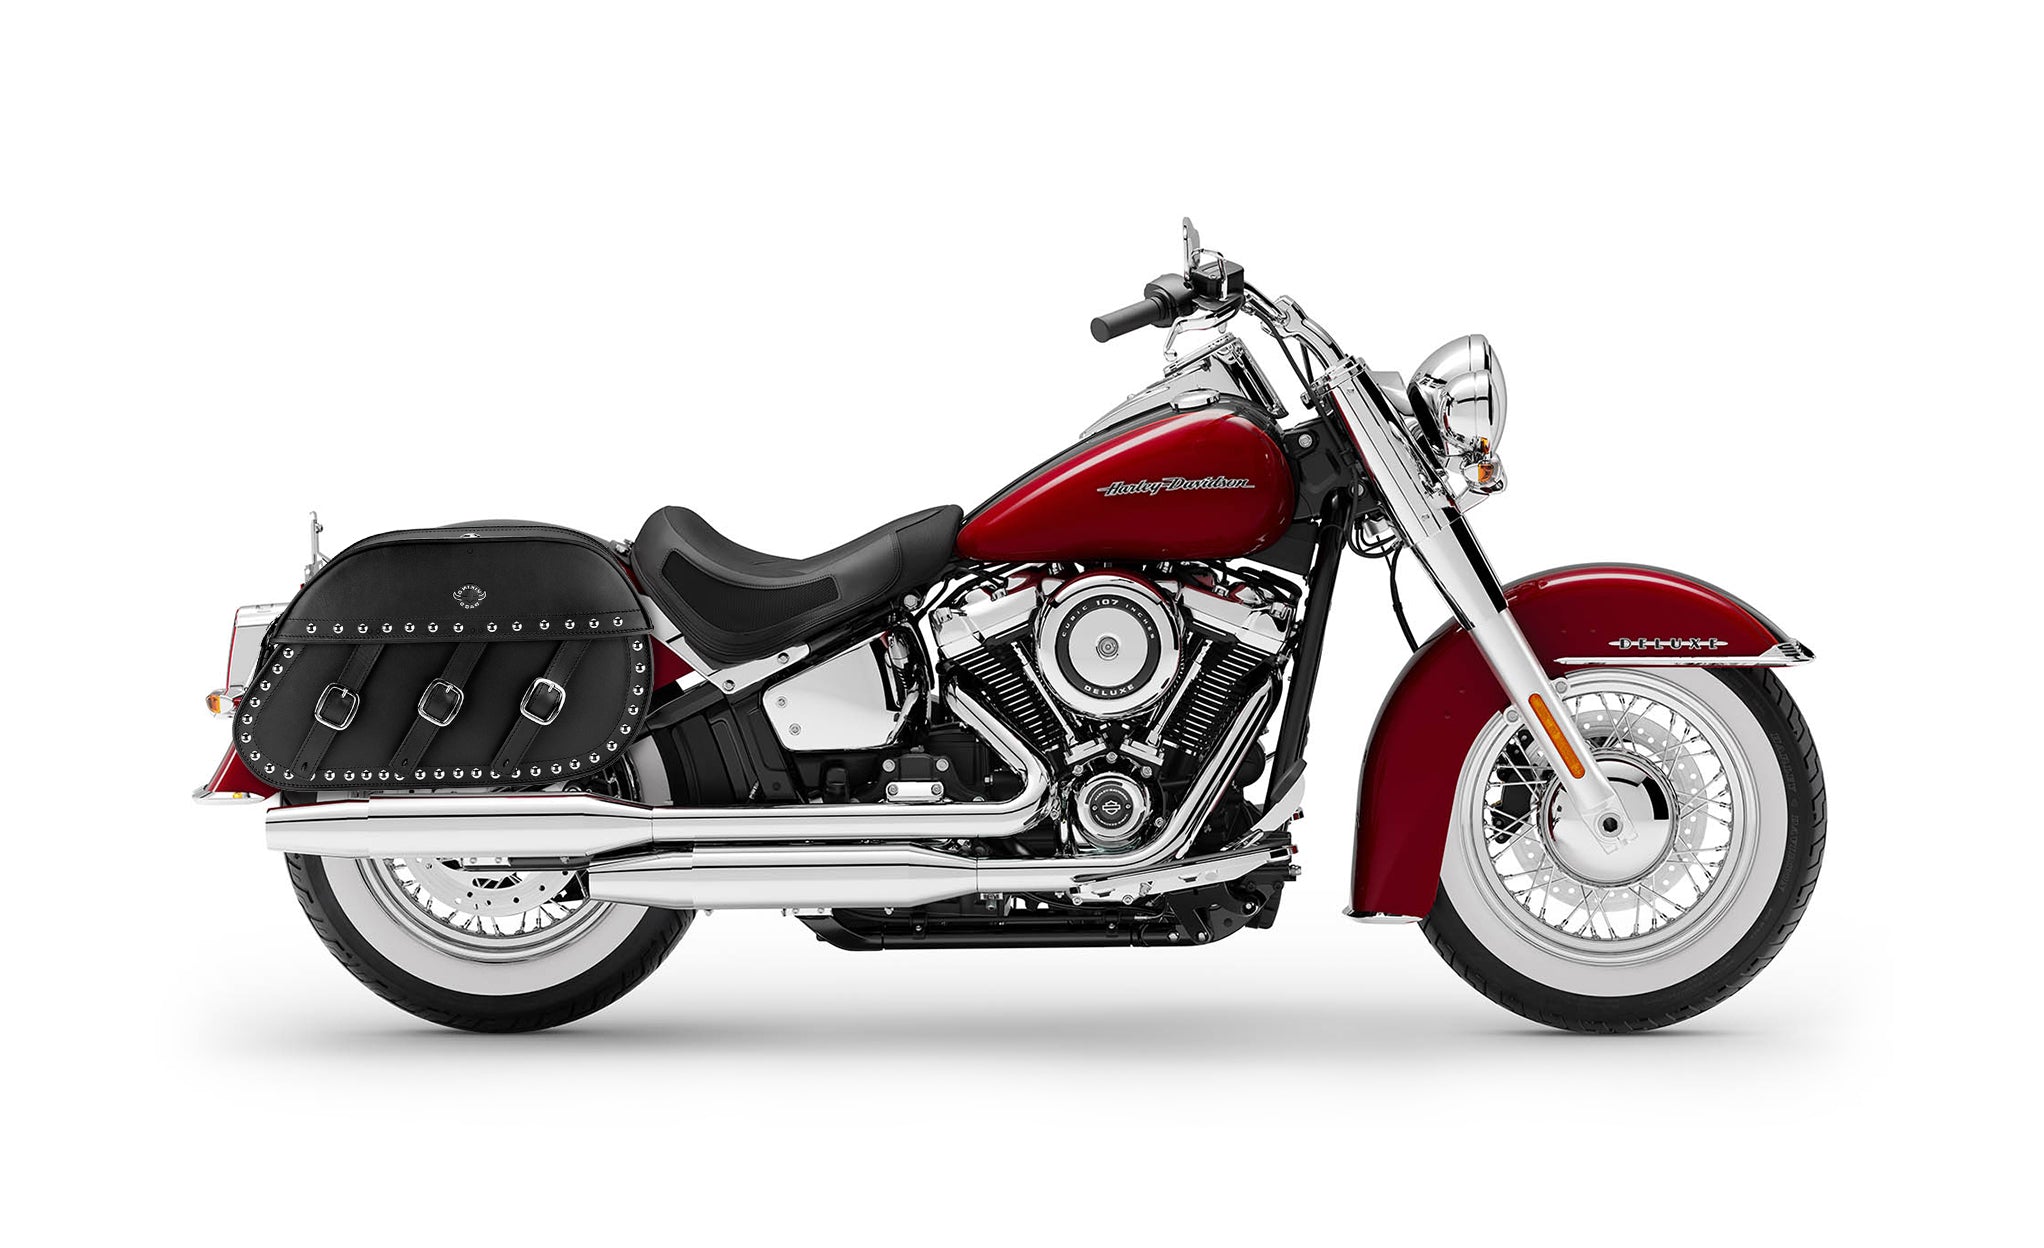 34L - Trianon Extra Large Studded Leather Saddlebags for Harley Softail Deluxe FLDE on Bike Photo @expand